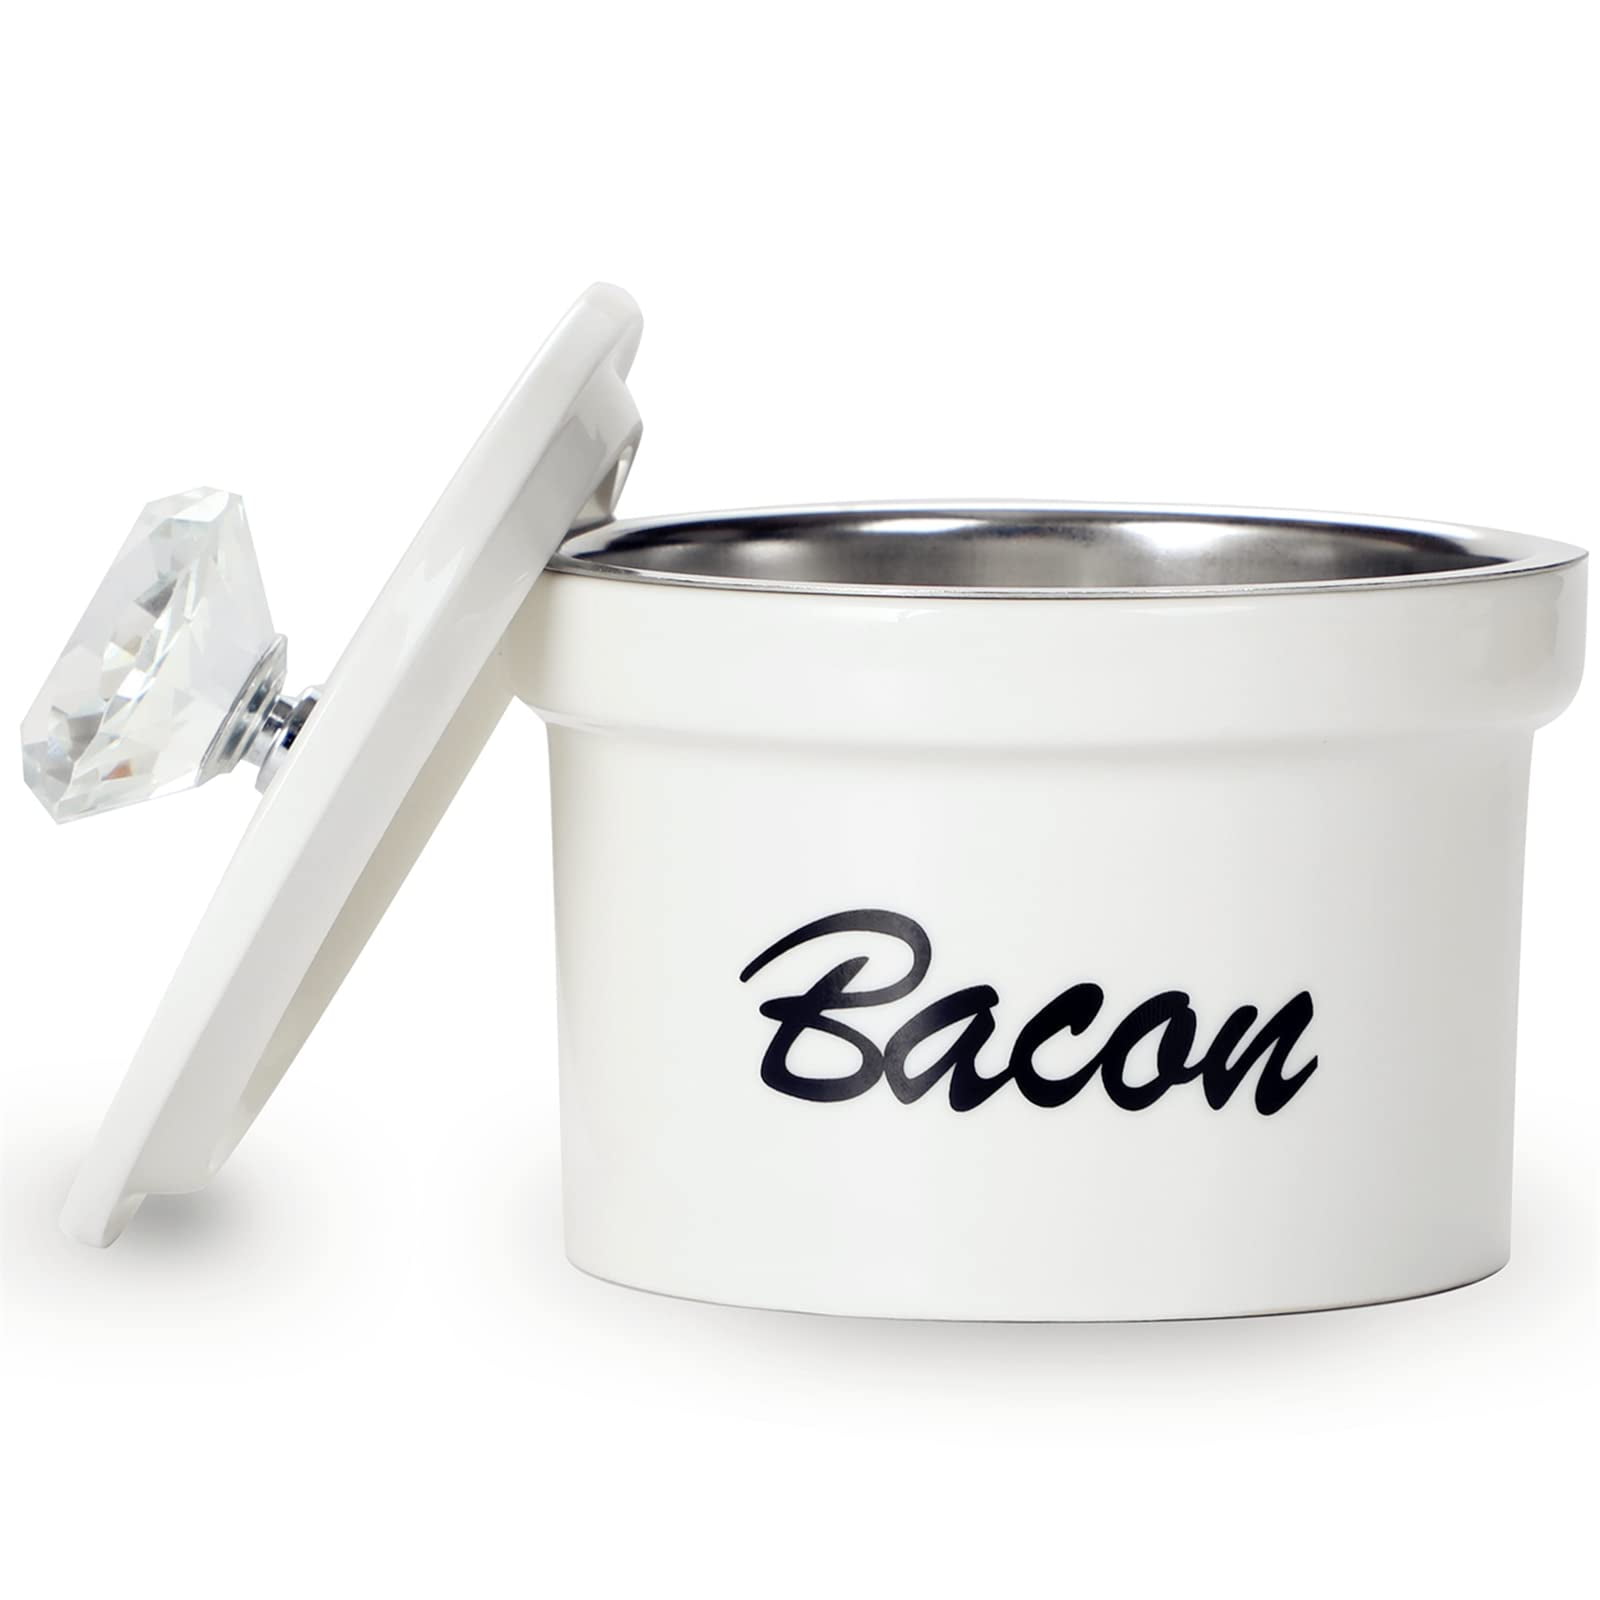 AuldHome Farmhouse Bacon Grease Container (Black), Enamelware Bacon Grease  Can with Strainer, Vintage Style, Keto-Friendly